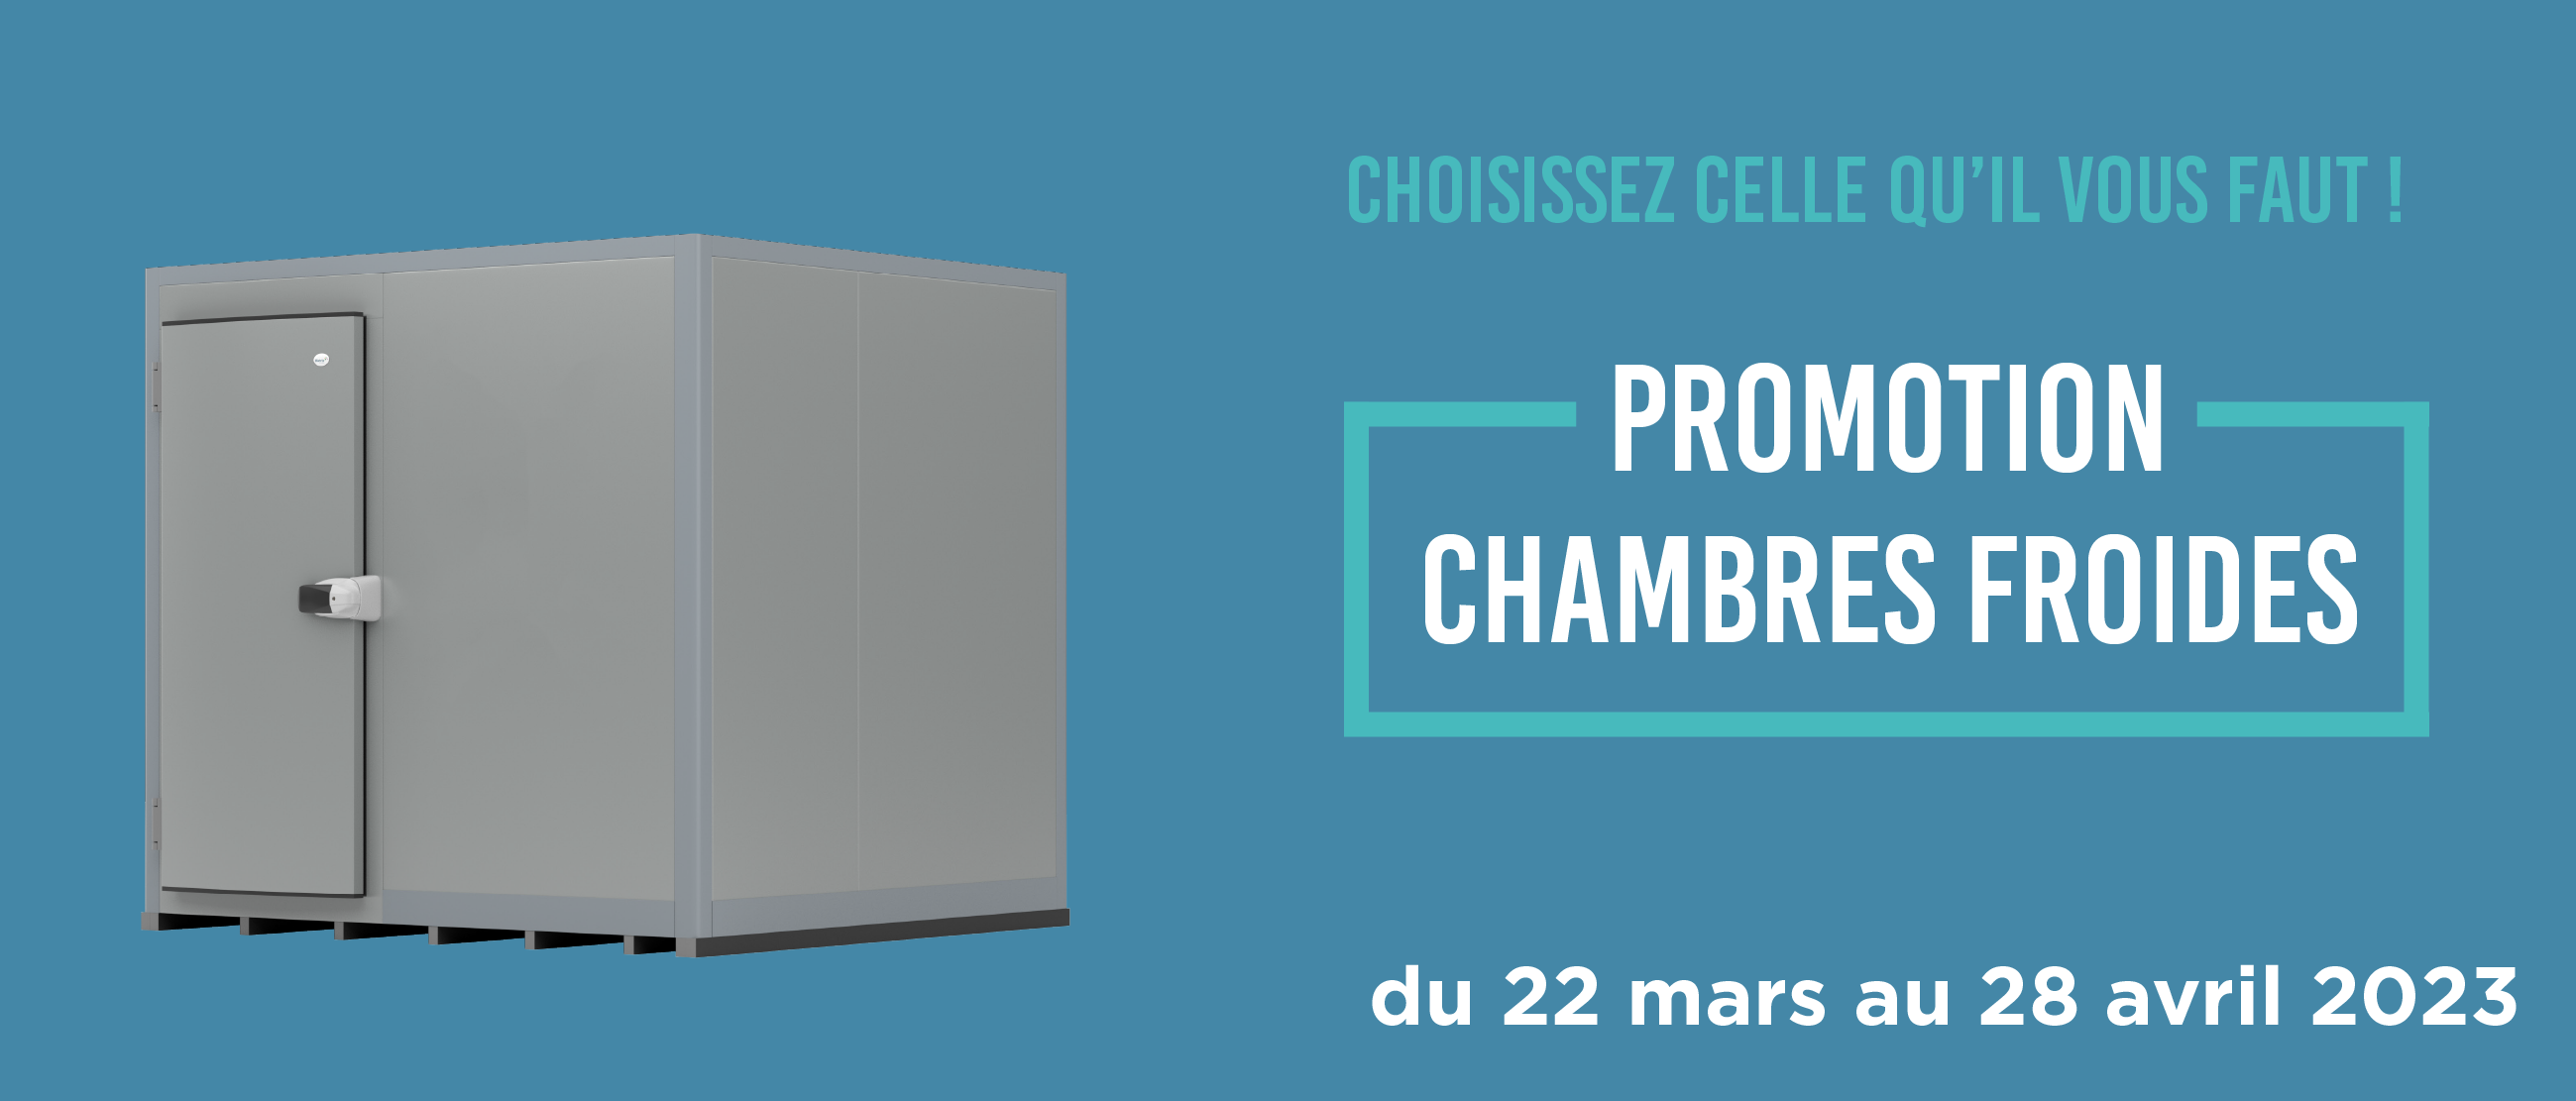 Promotion chambres froides